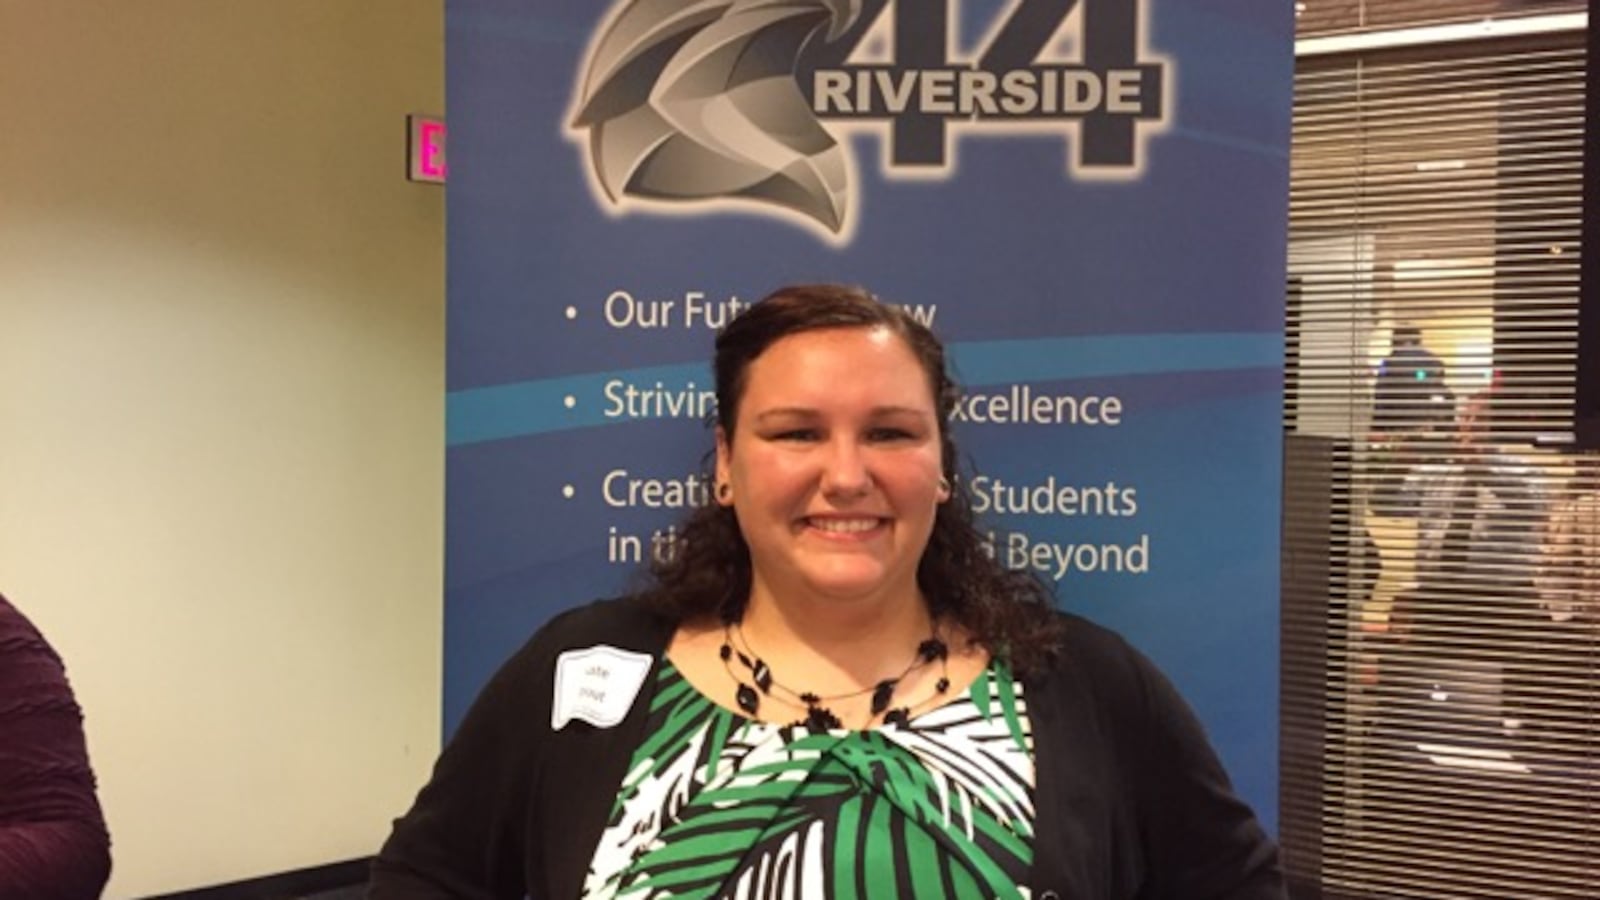 Kate Stout is a fifth grade teacher at Riverside School in IPS, also known as School 44.